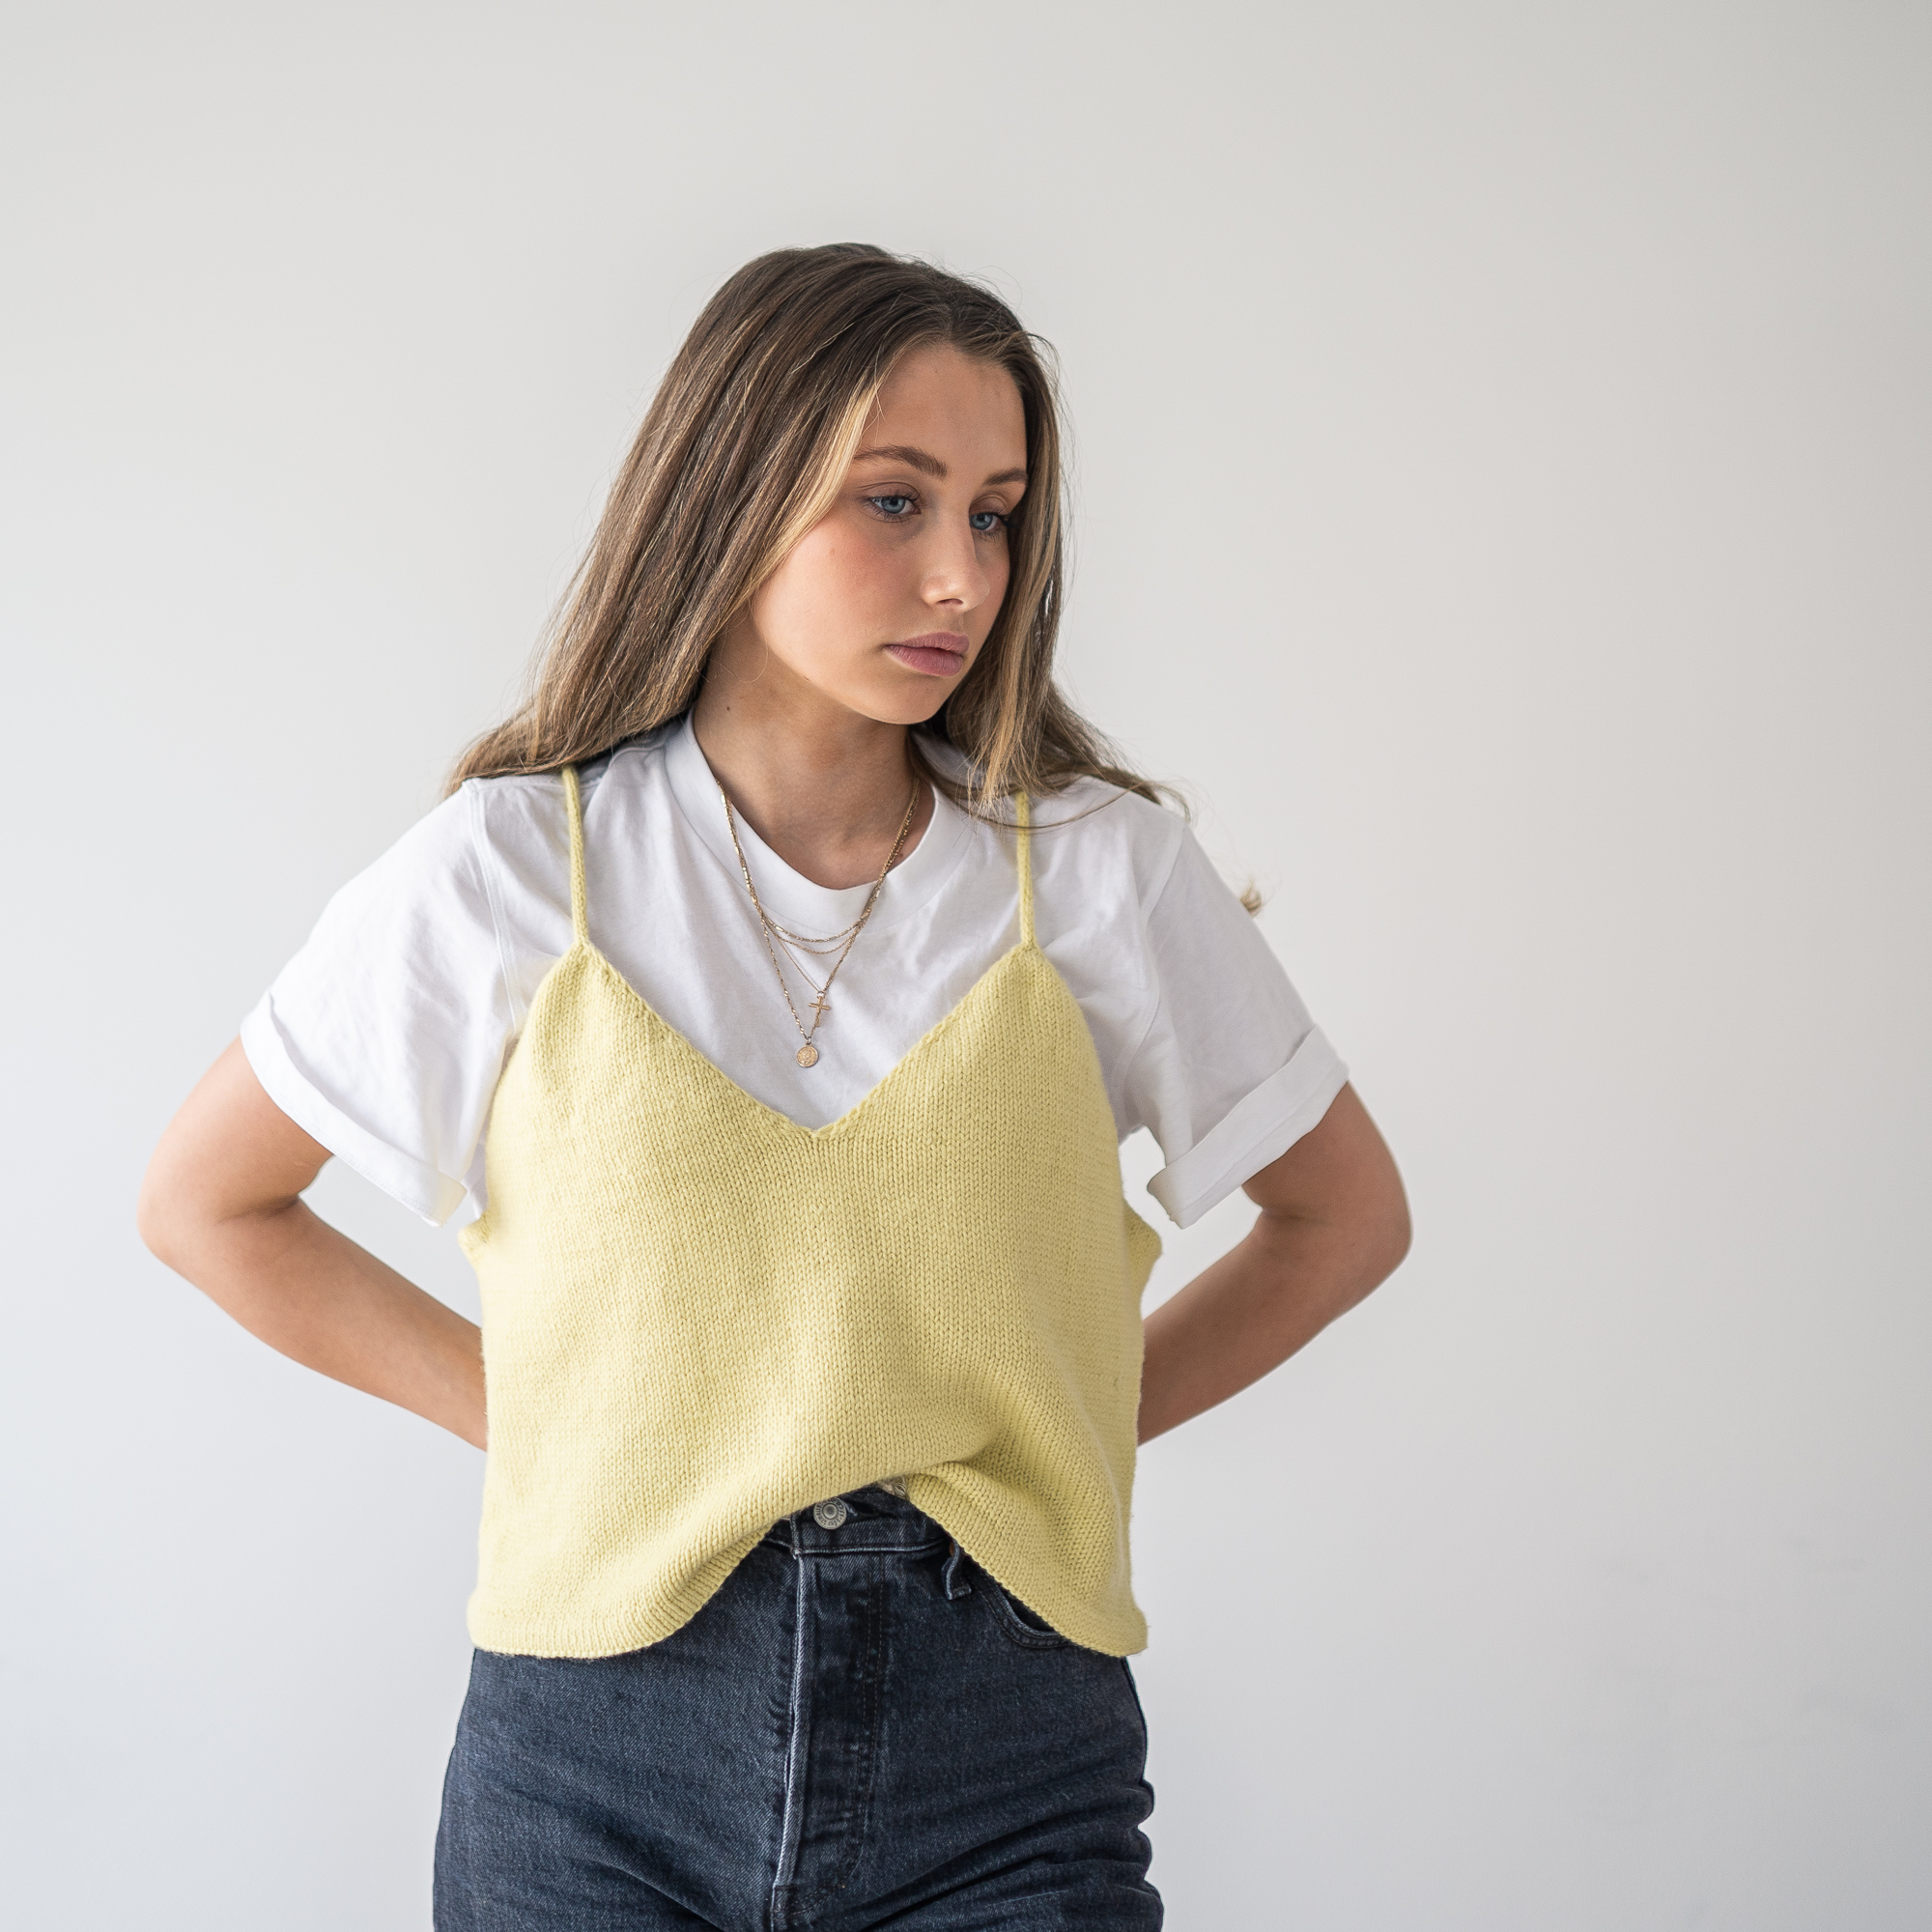  - Thelma top | Knitted summer top | Knitting kit - by HipKnitShop - 03/06/2021